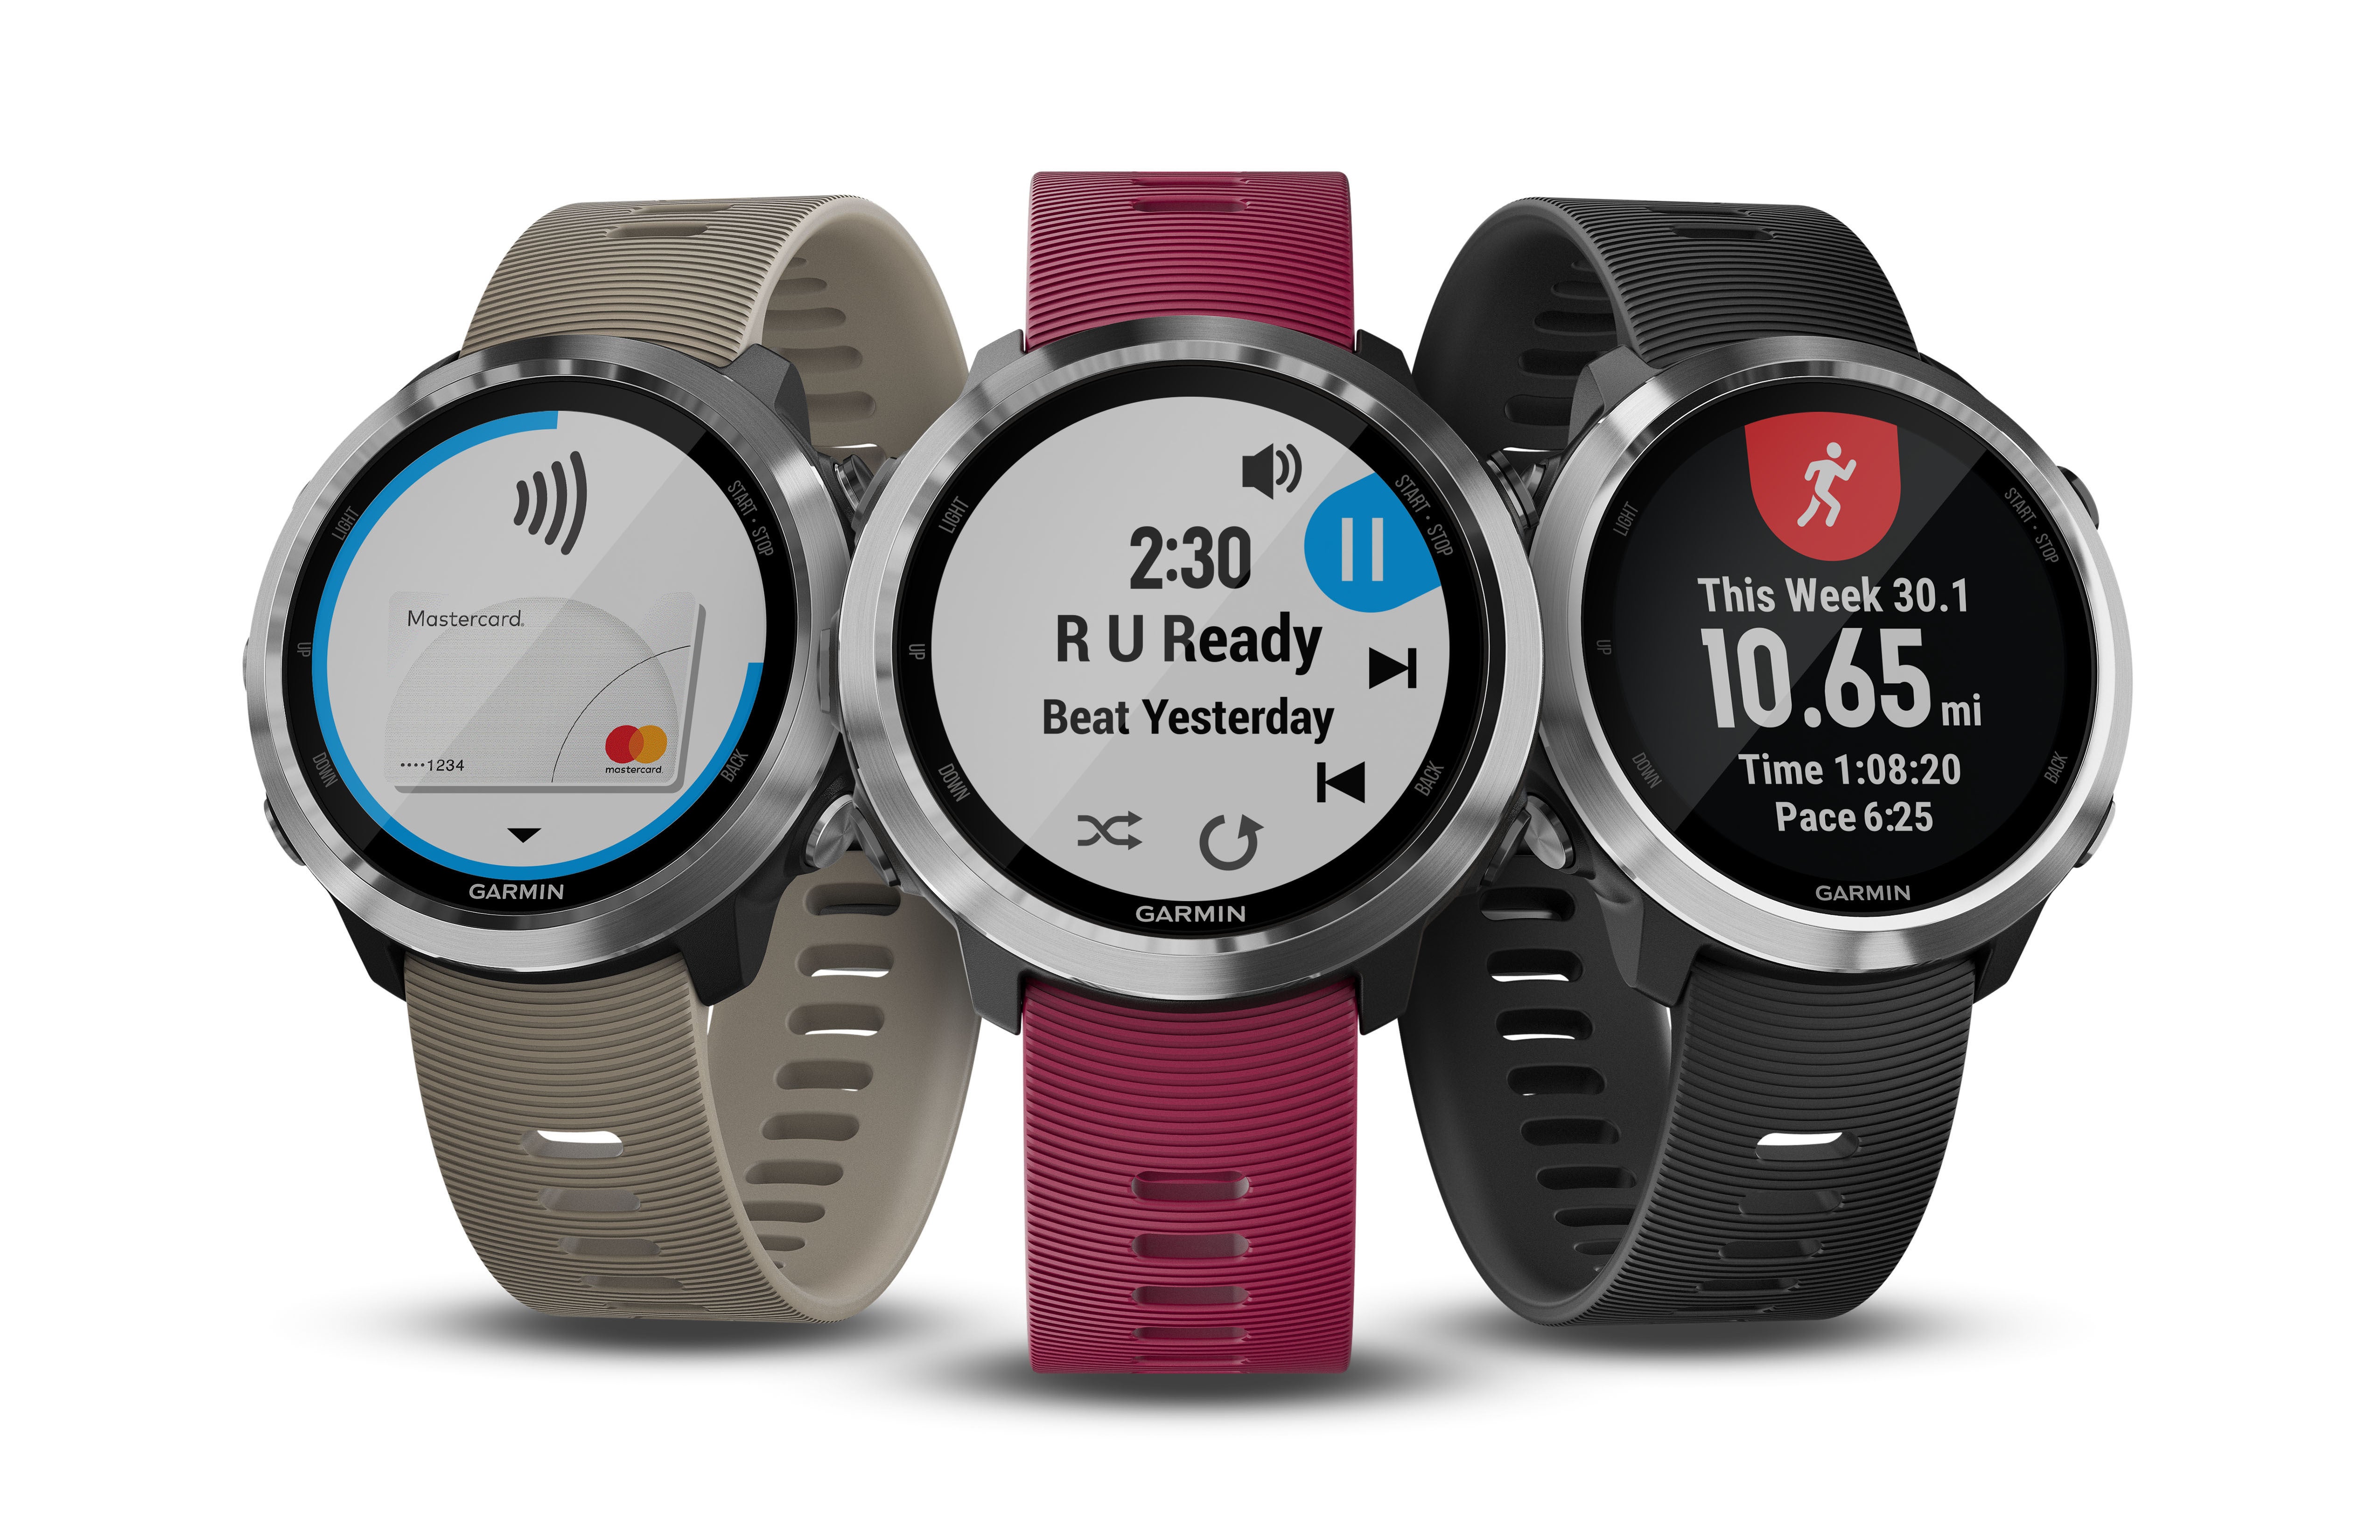 Garmin's latest Forerunner 645 Music smartwatch can store up to 500 songs